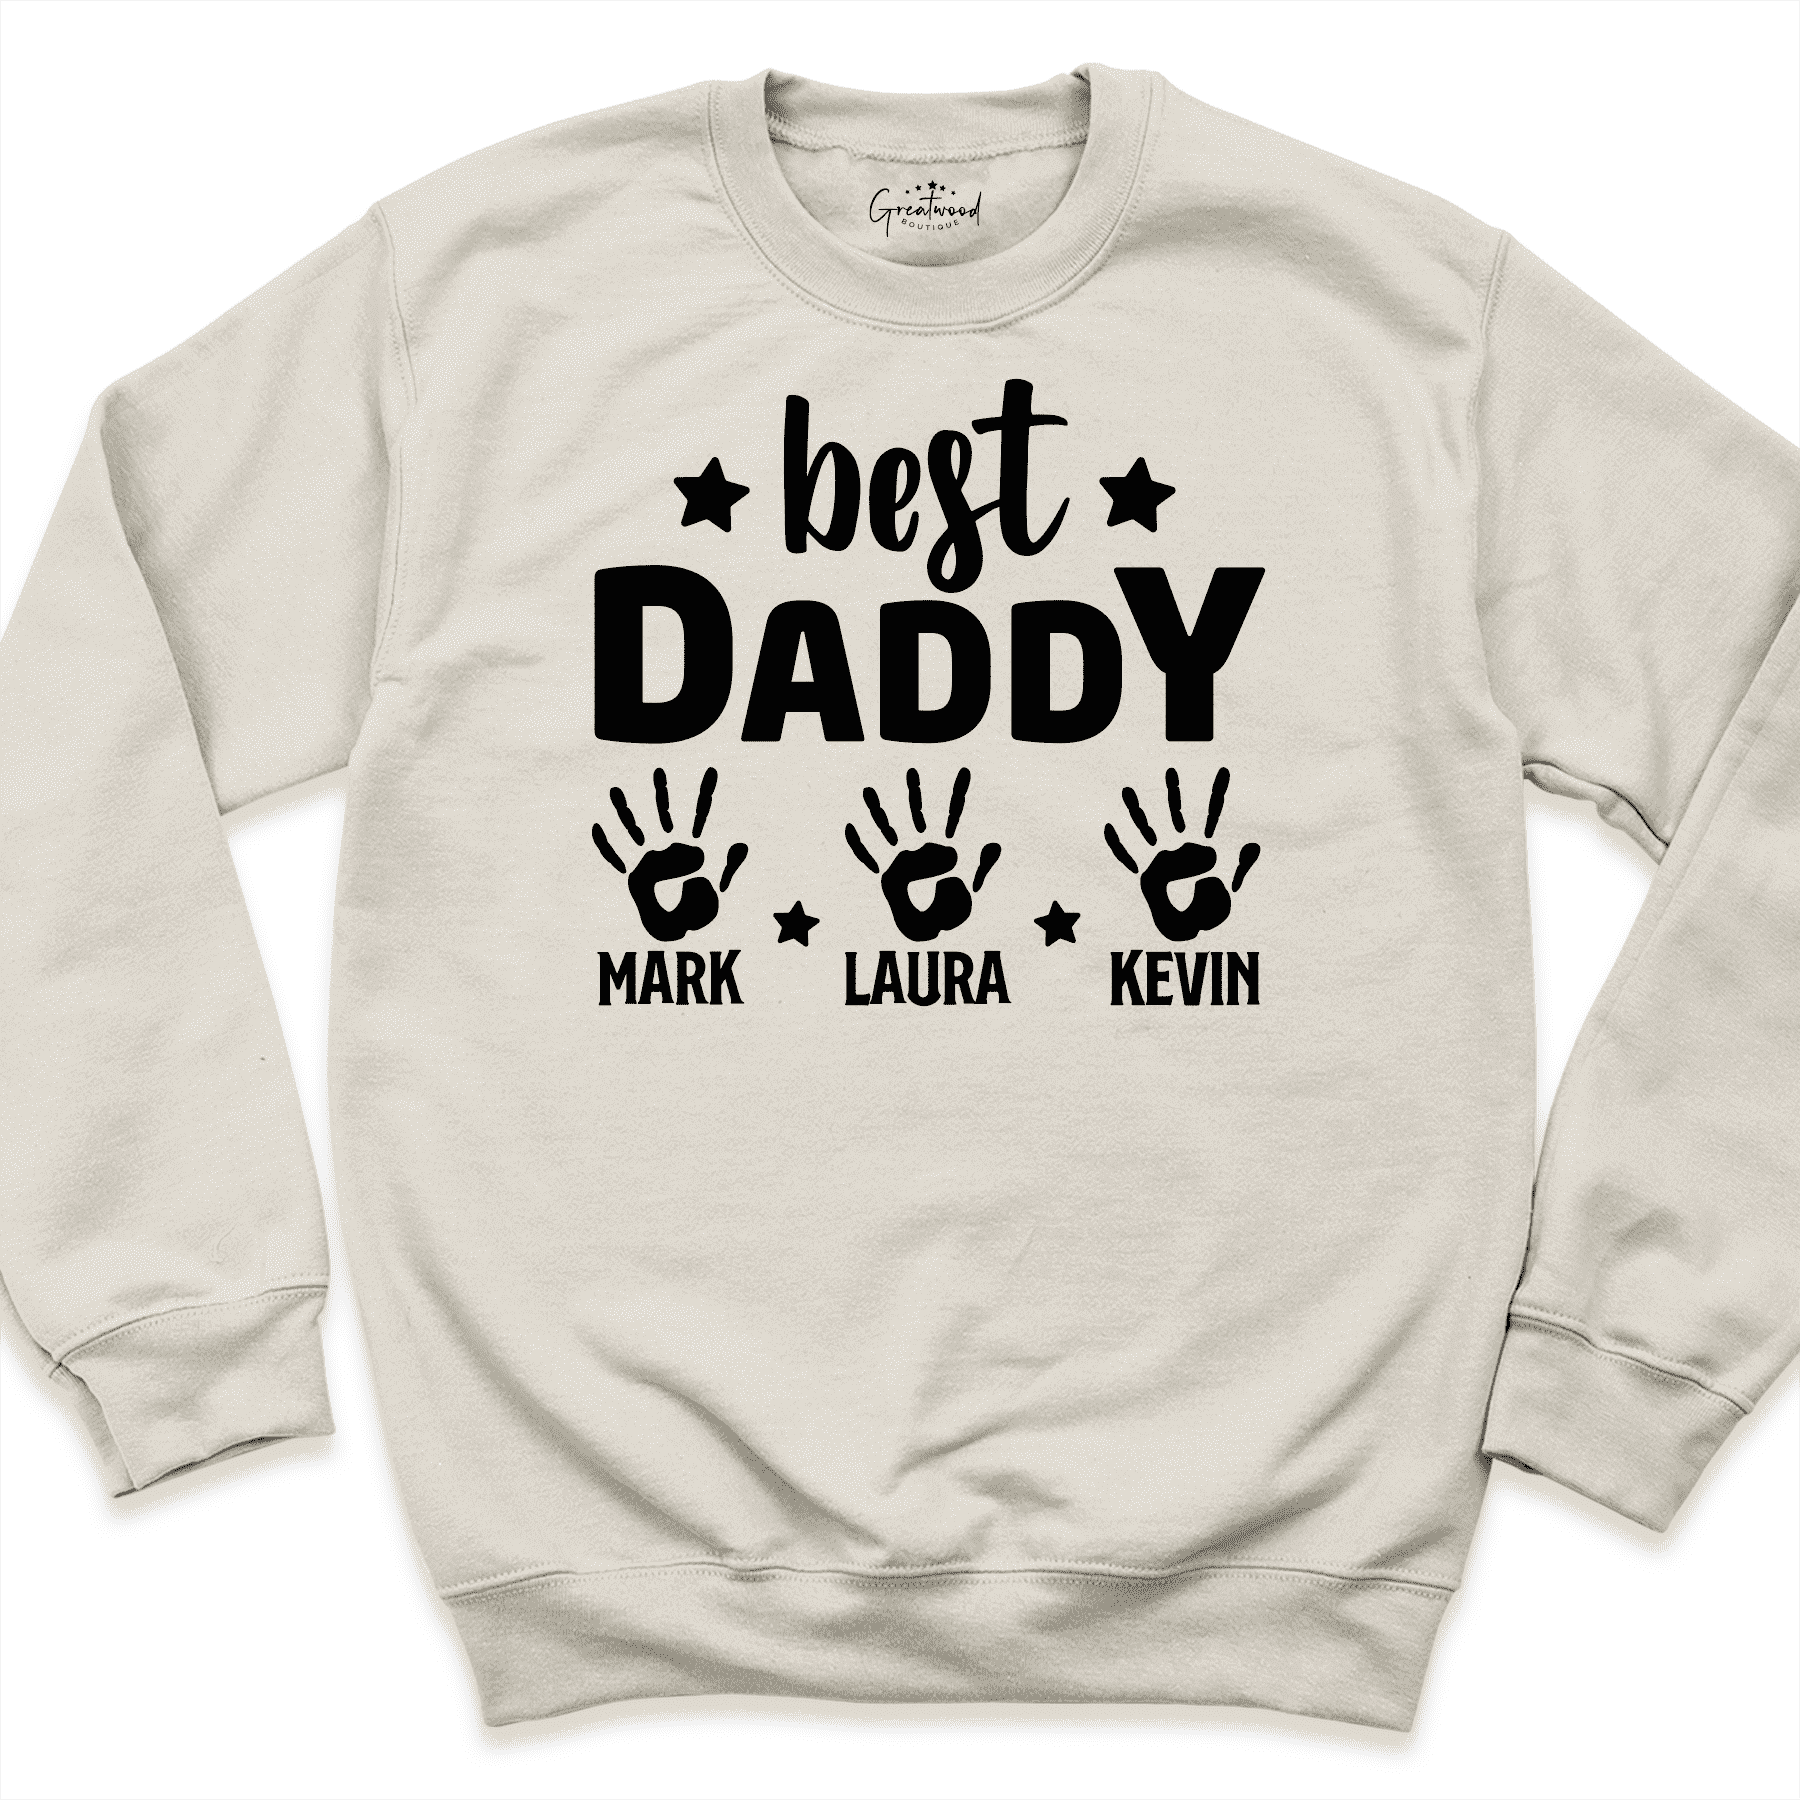 Best Daddy Custom Shirt Sand - Greatwood Boutique